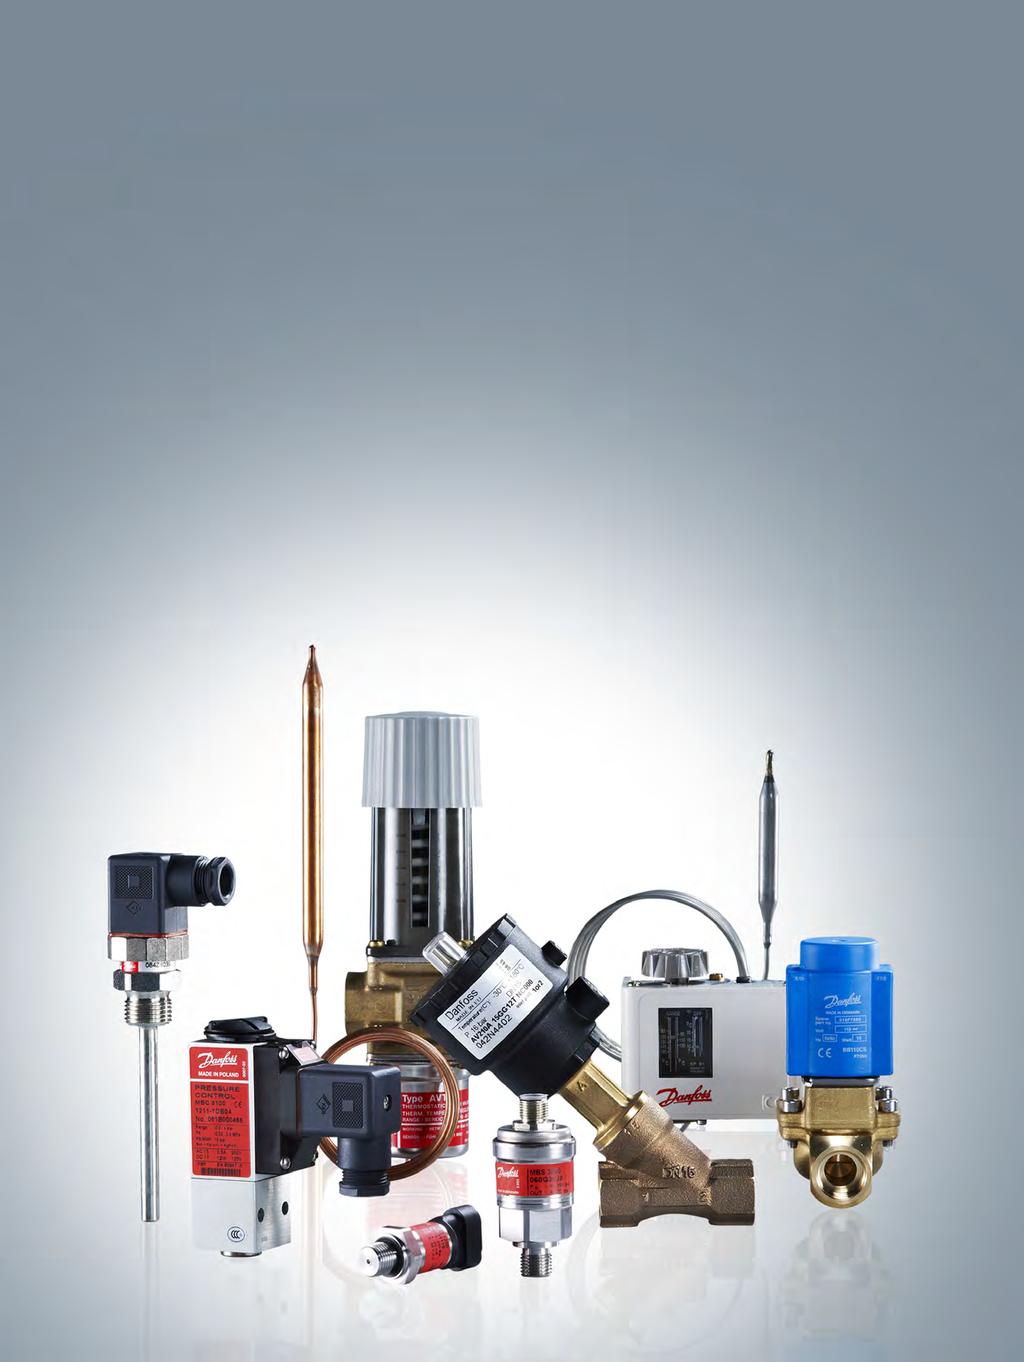 Pressure and temperature monitoring and control, fluid control Core Industrial Products for